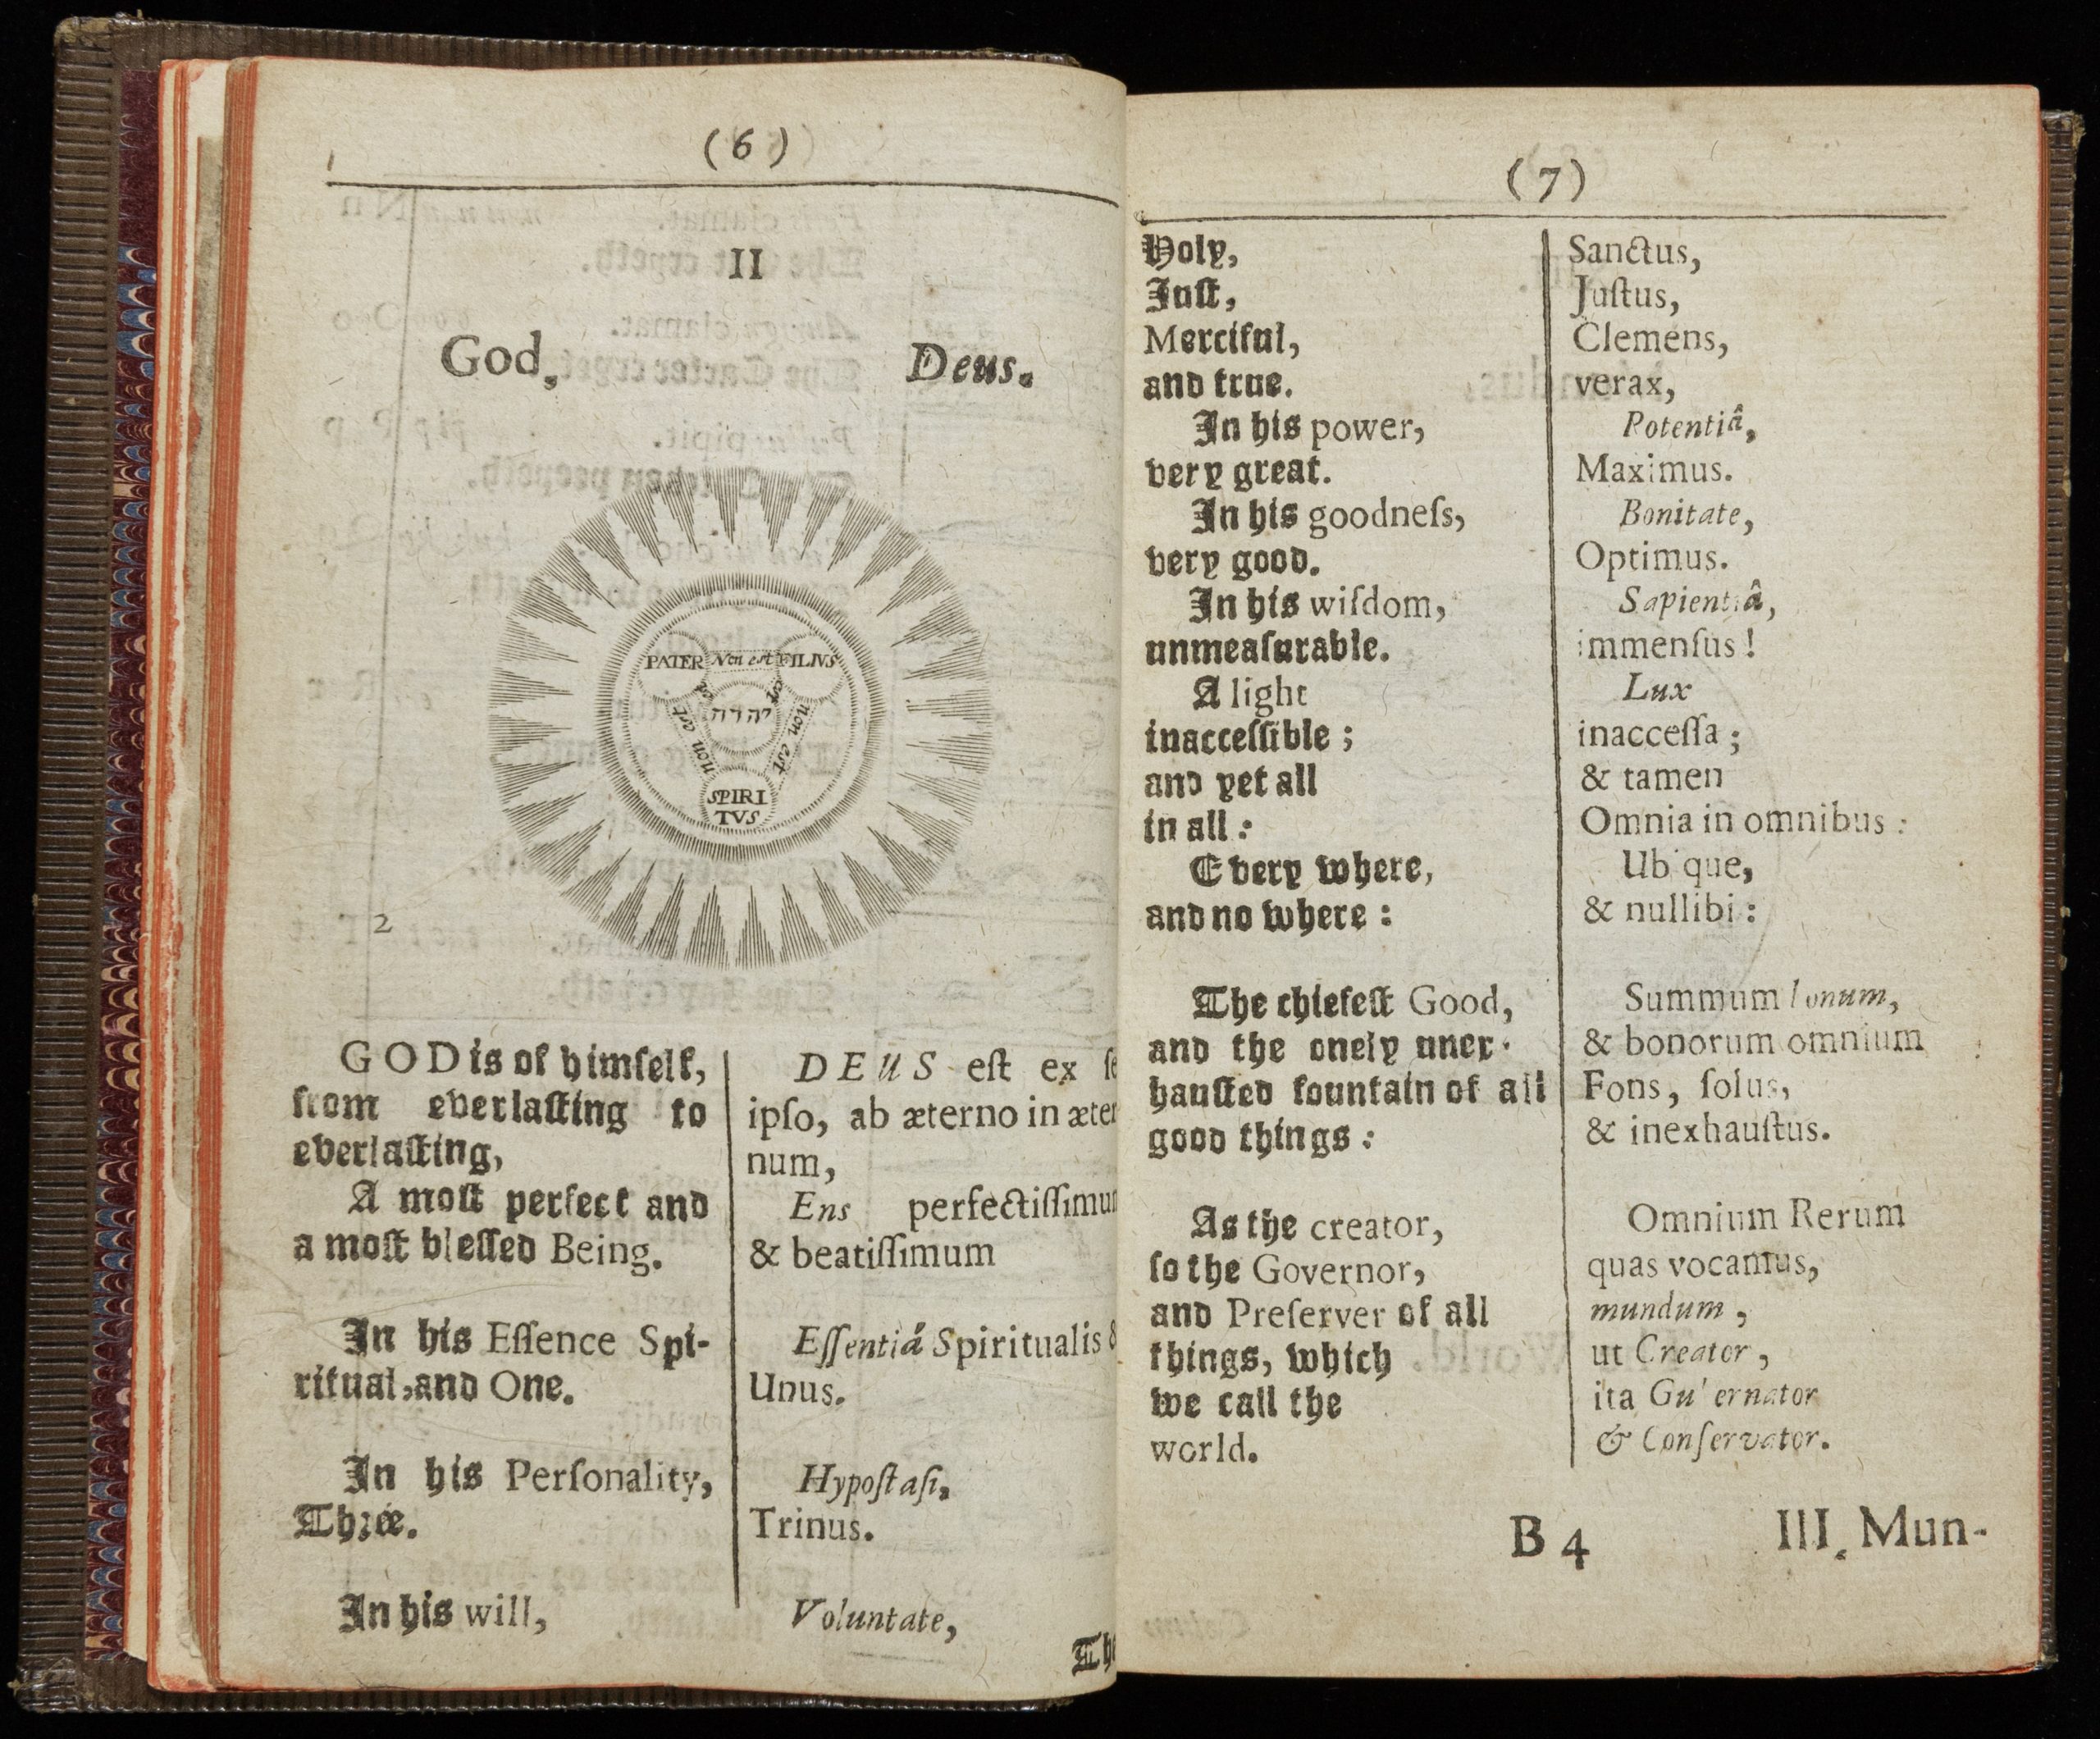 Two-page spread of an early printed book. Text is in English and Latin in black in an 17th-century font (some "s"s written as "f"s). On the top of the left-hand page is the title "God, Deus." below this is a circular woodcut print image. In the center of the circle is are three small circles connected by bars to form a triangle. The left-hand circle is labled "Pater." The right-hand circle is labeled "Filius." The bottom circle is labeled "Spiritus." The bars connecting the circles are labeled "non et." Around the circles is a larger cirlce of short hatched lines. Around this is a circle made up of rays, so the image looks like the sun or a star. Below the image and on the right-hand page is text in English and Latin. In English it reads, "God is og himfelf/from everlafting to/everlasting,/A most perfect and/a moft bleffed Being./In his Effence Spiritual, and One./In his Perfonality,/Three./Holy,/Juft,/Merciful,/and true./In his power,/very great./In his goodnefs,/very good./In his wifdom,/unmeafurable./A light/inacceffible;/and yet all/in all: Every where/and no where:/The cheifeft Good,/and the onely underhanffeed fountain of all good things:/As the creator,/so the Governor,/and Preferserver of all/thing, which/we call the/world."